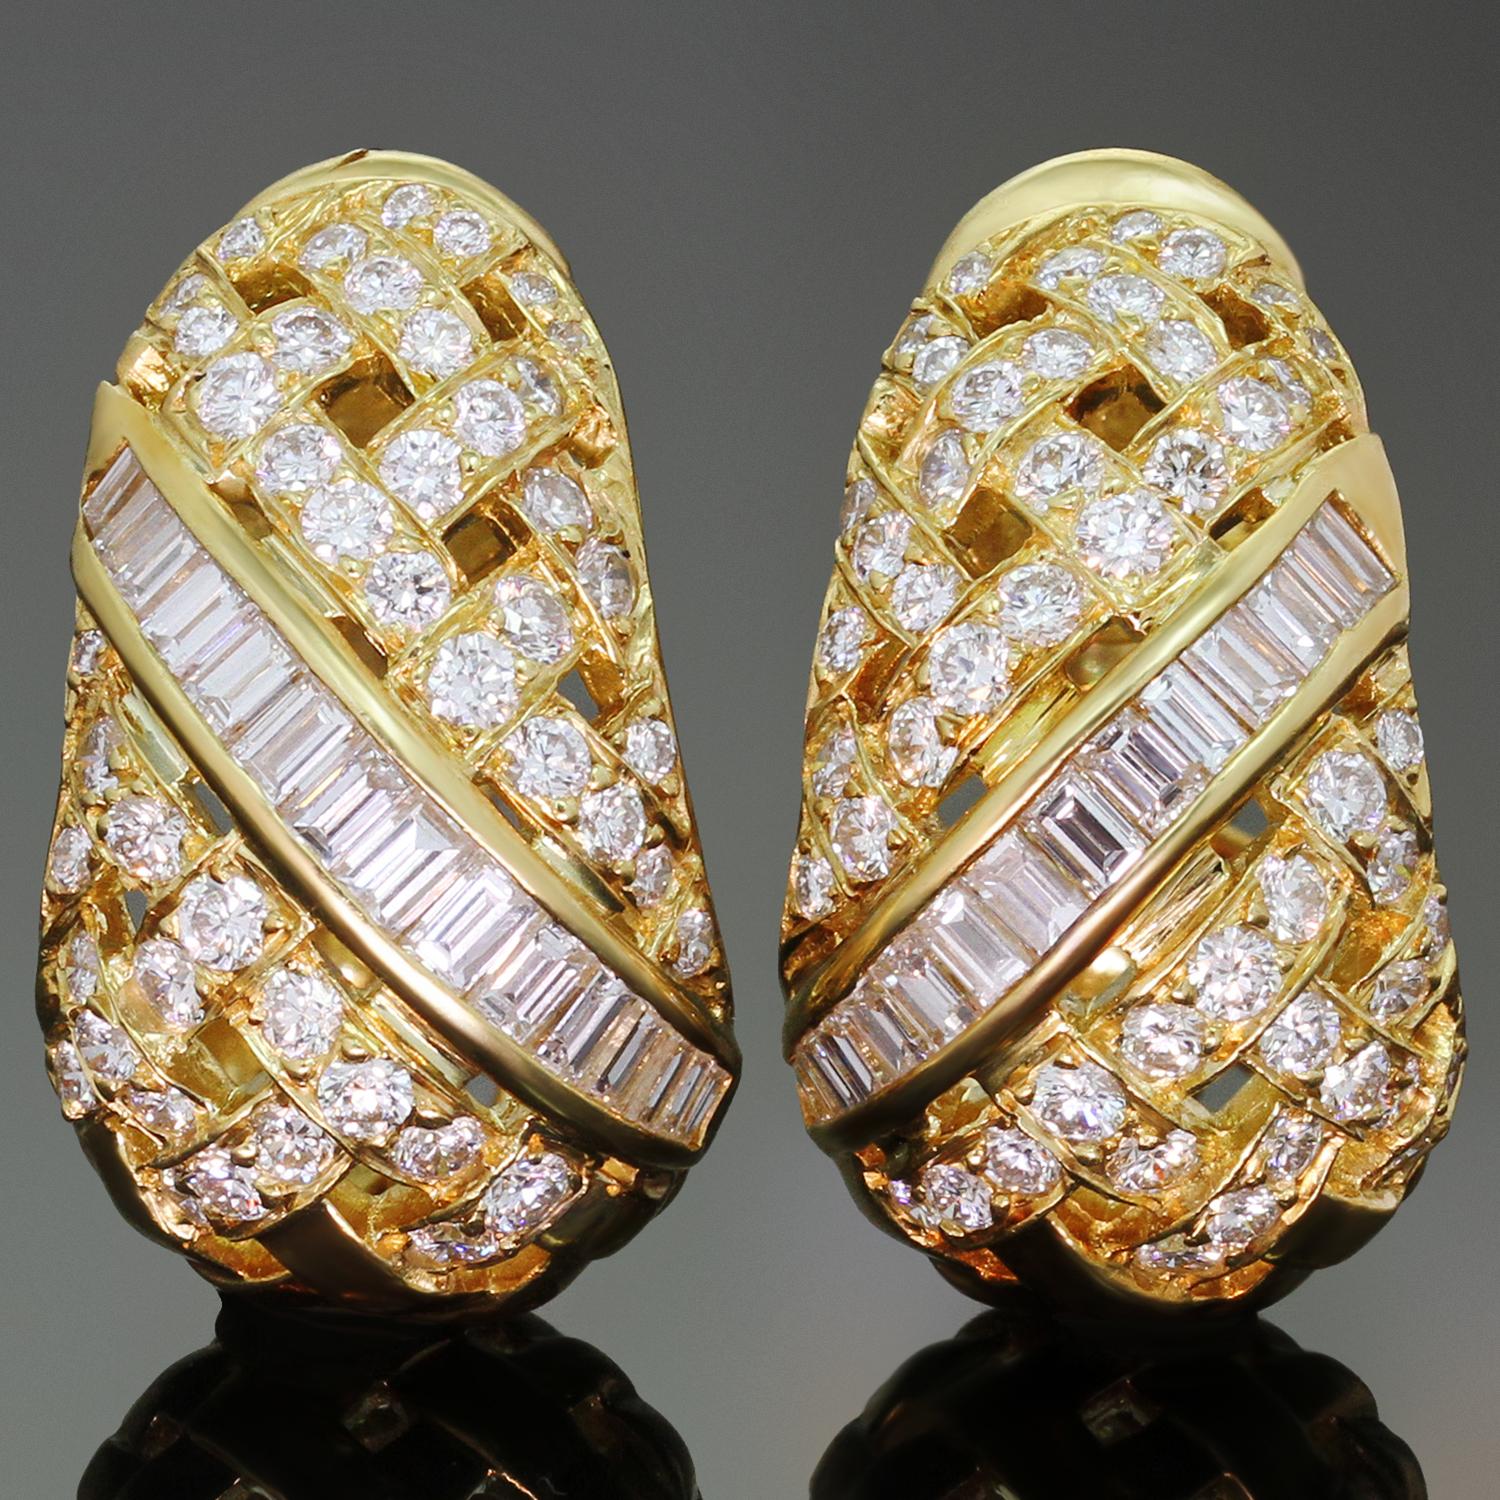 These gorgeous earrings from the exquisite Vannerie collection by Tiffany & Co. is crafted in 18k yellow gold and set with 92 brilliant-cut round diamonds weighing an estimated 2.70 carats and 30 baguette-cut diamonds weighing an estimated 1.50